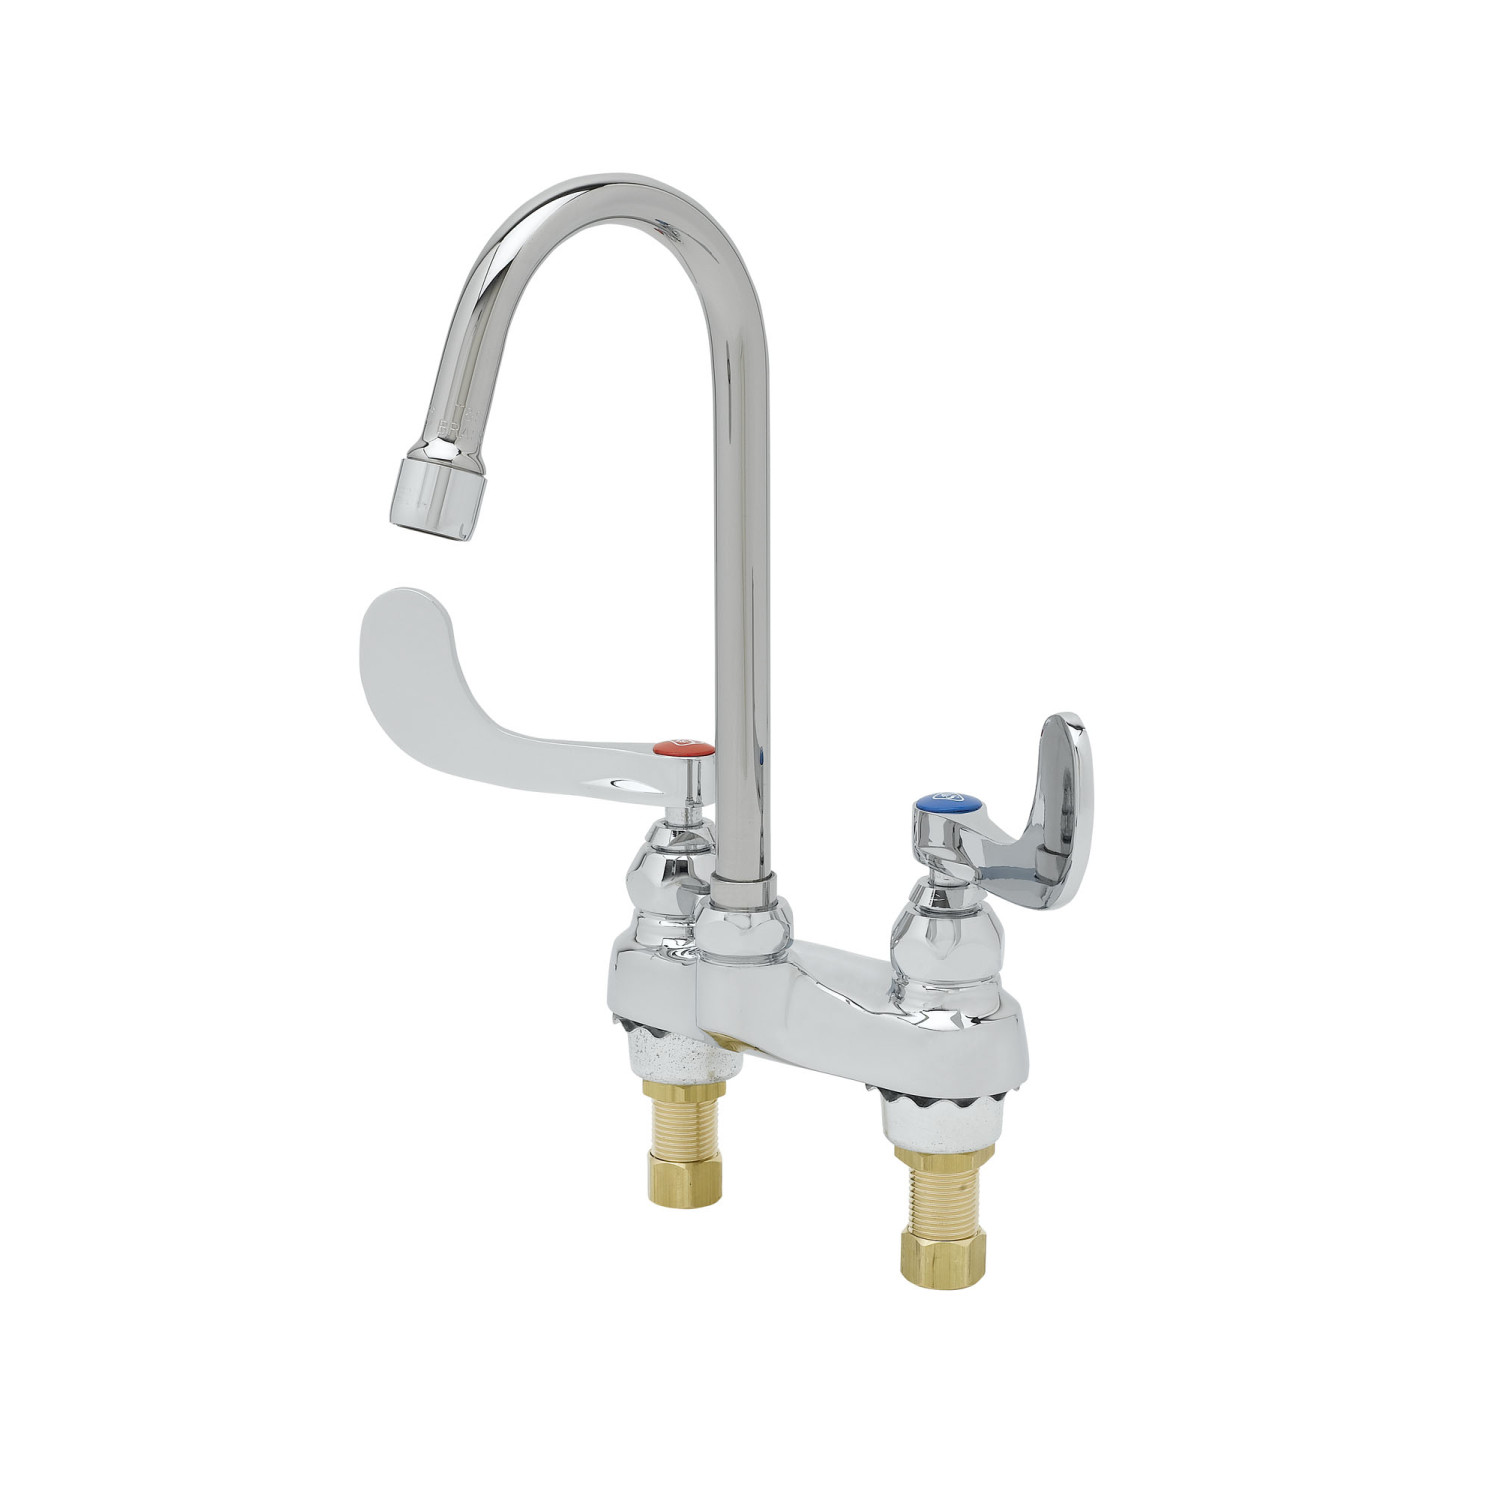 B-0892-01 Medical & Lavatory Faucets | T&S Brass